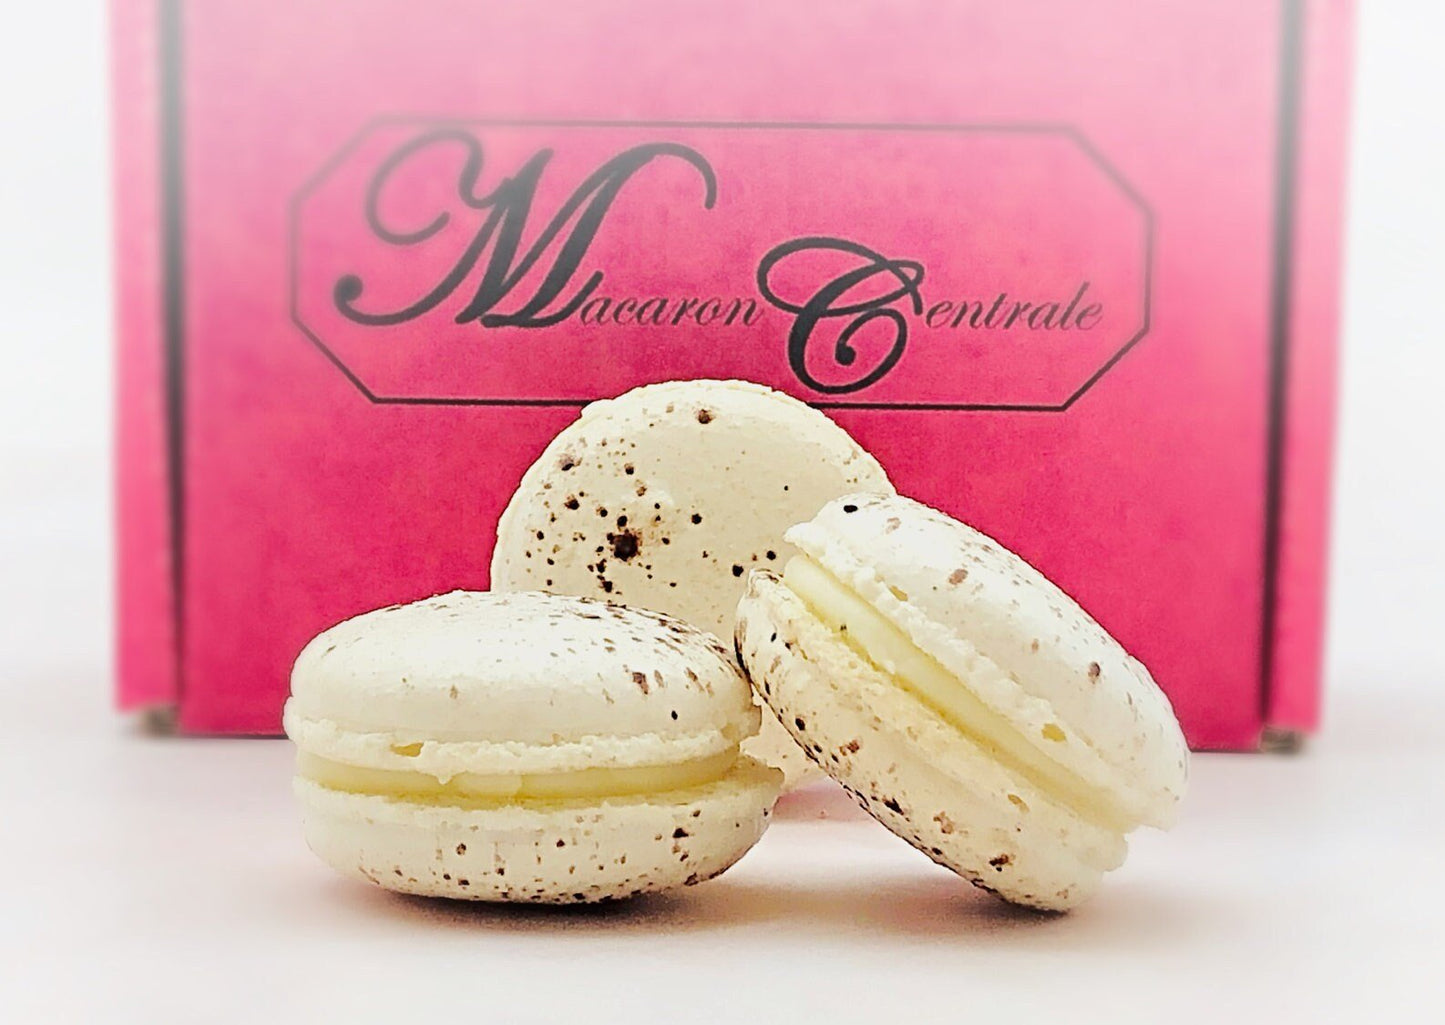 6 Pack White Chocolate Macarons - Macaron Centrale